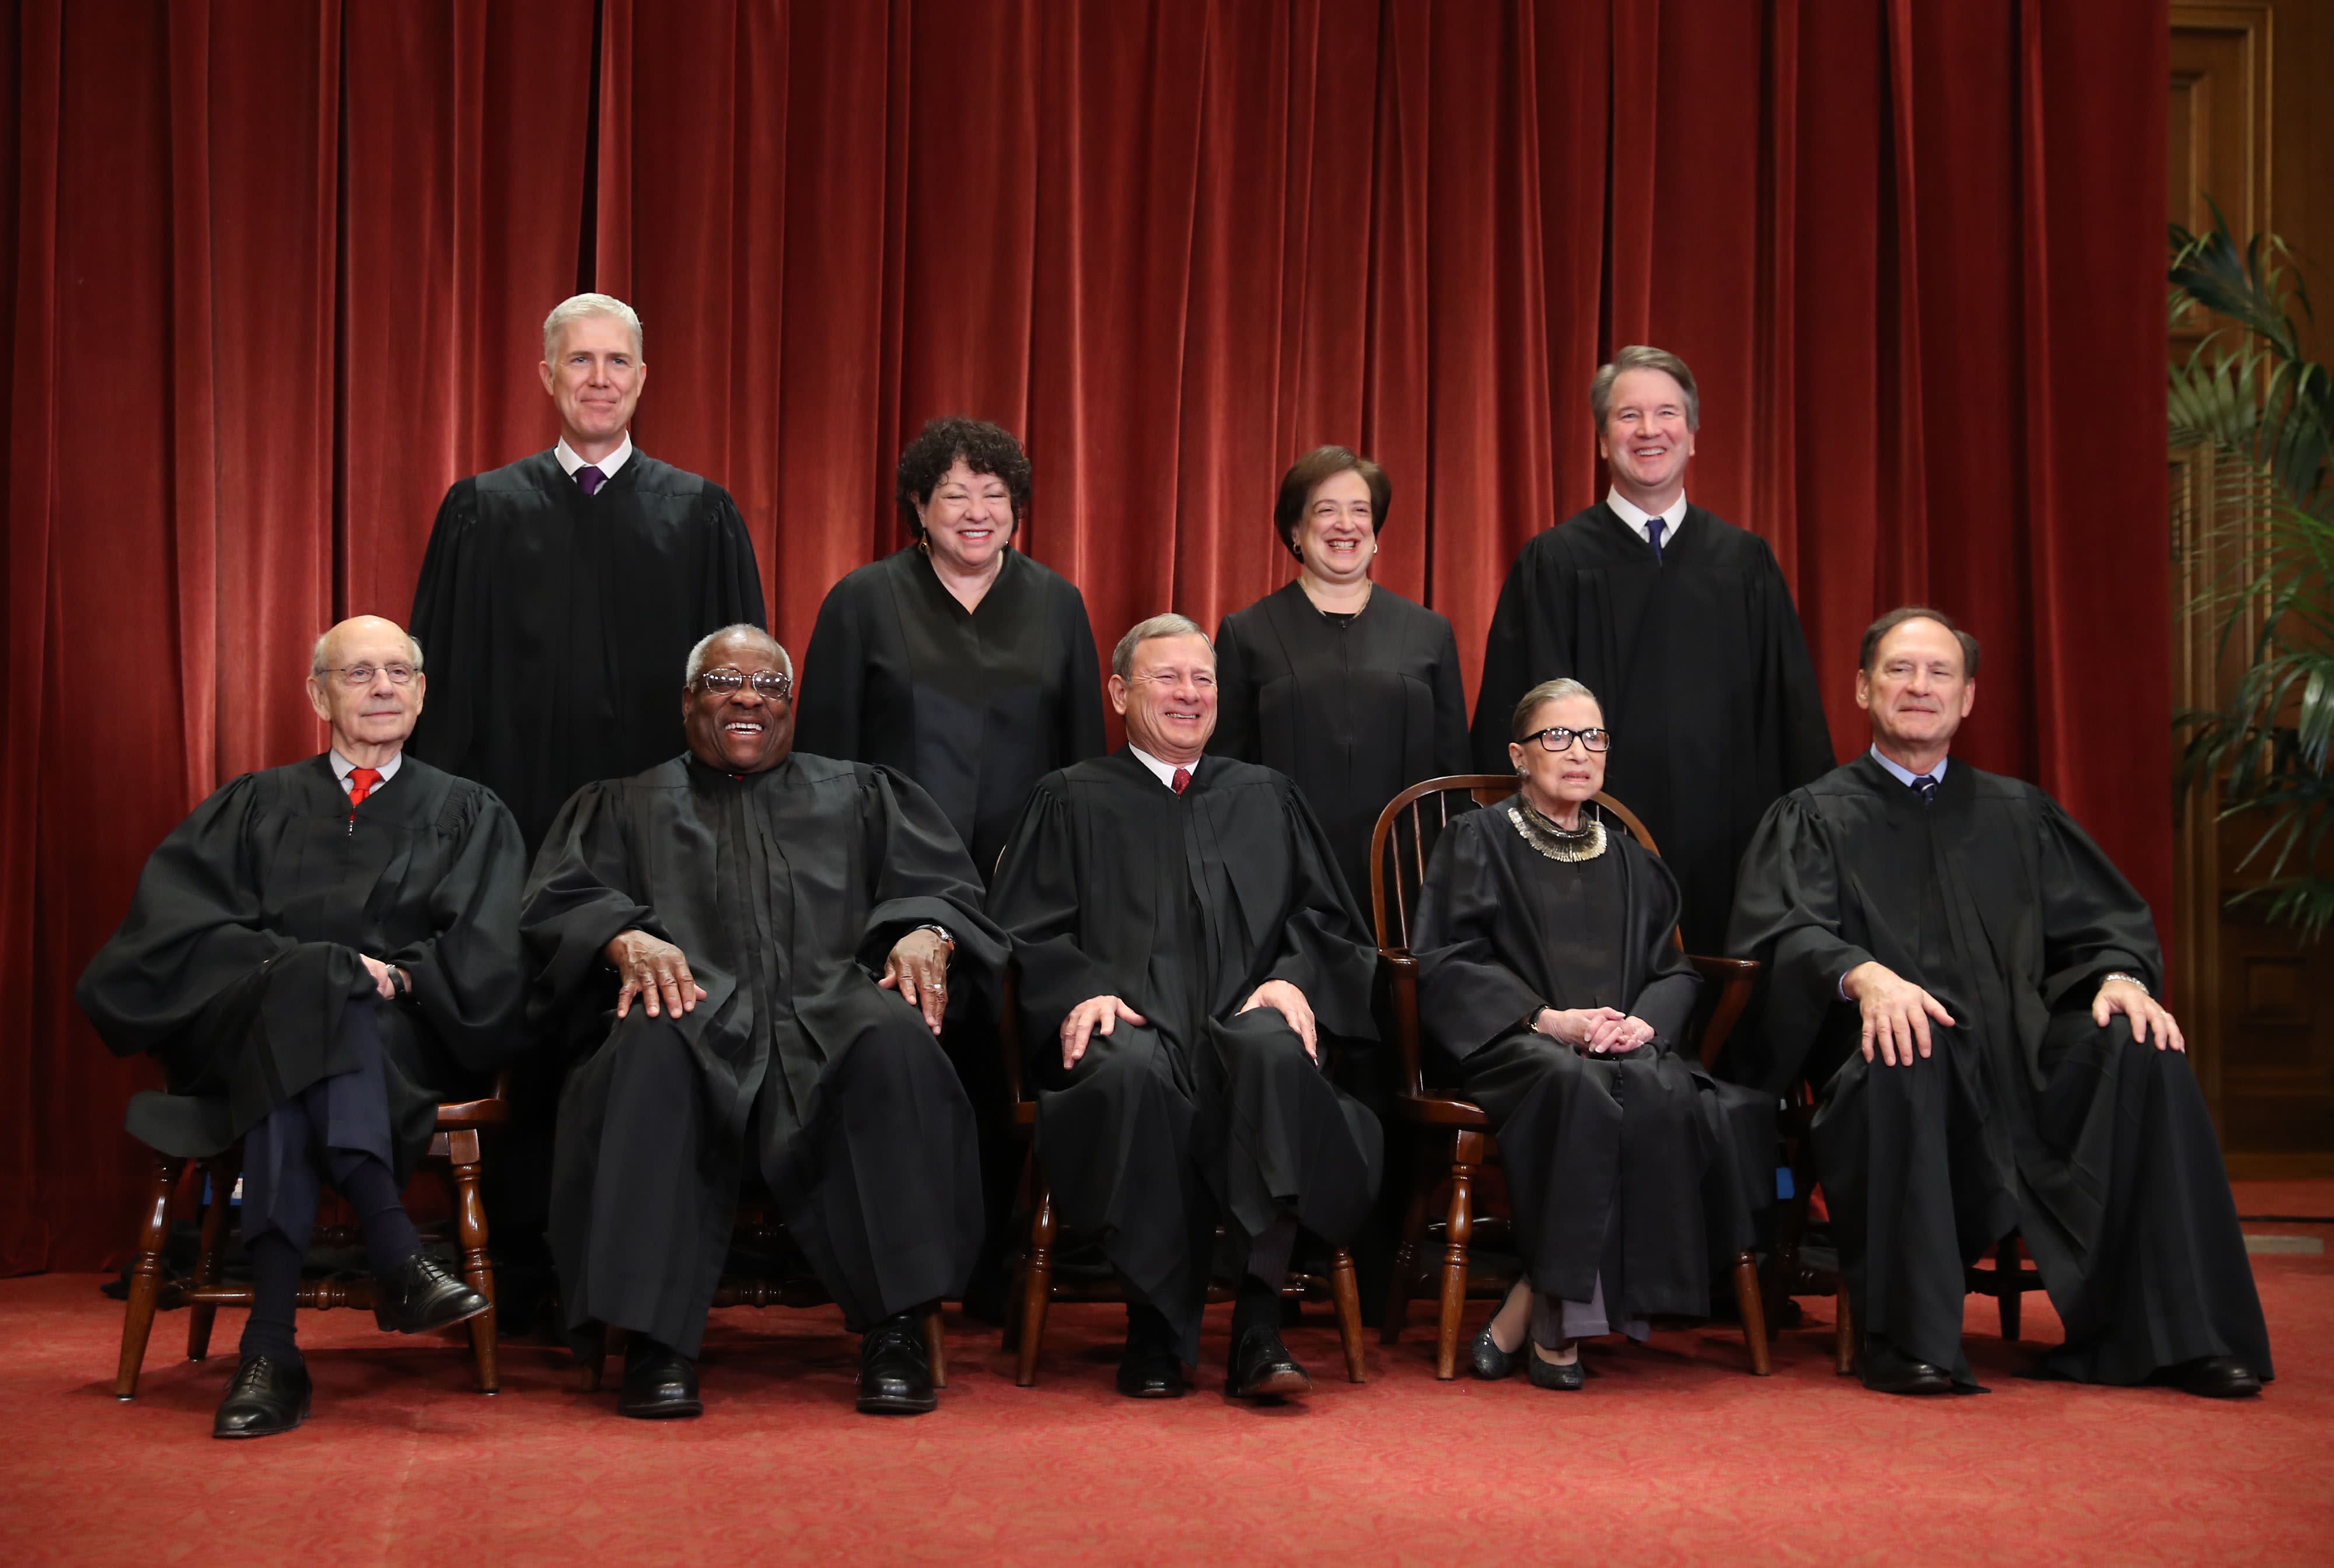 Who Are The Nine Judges Of The Supreme Court Justices A party to a